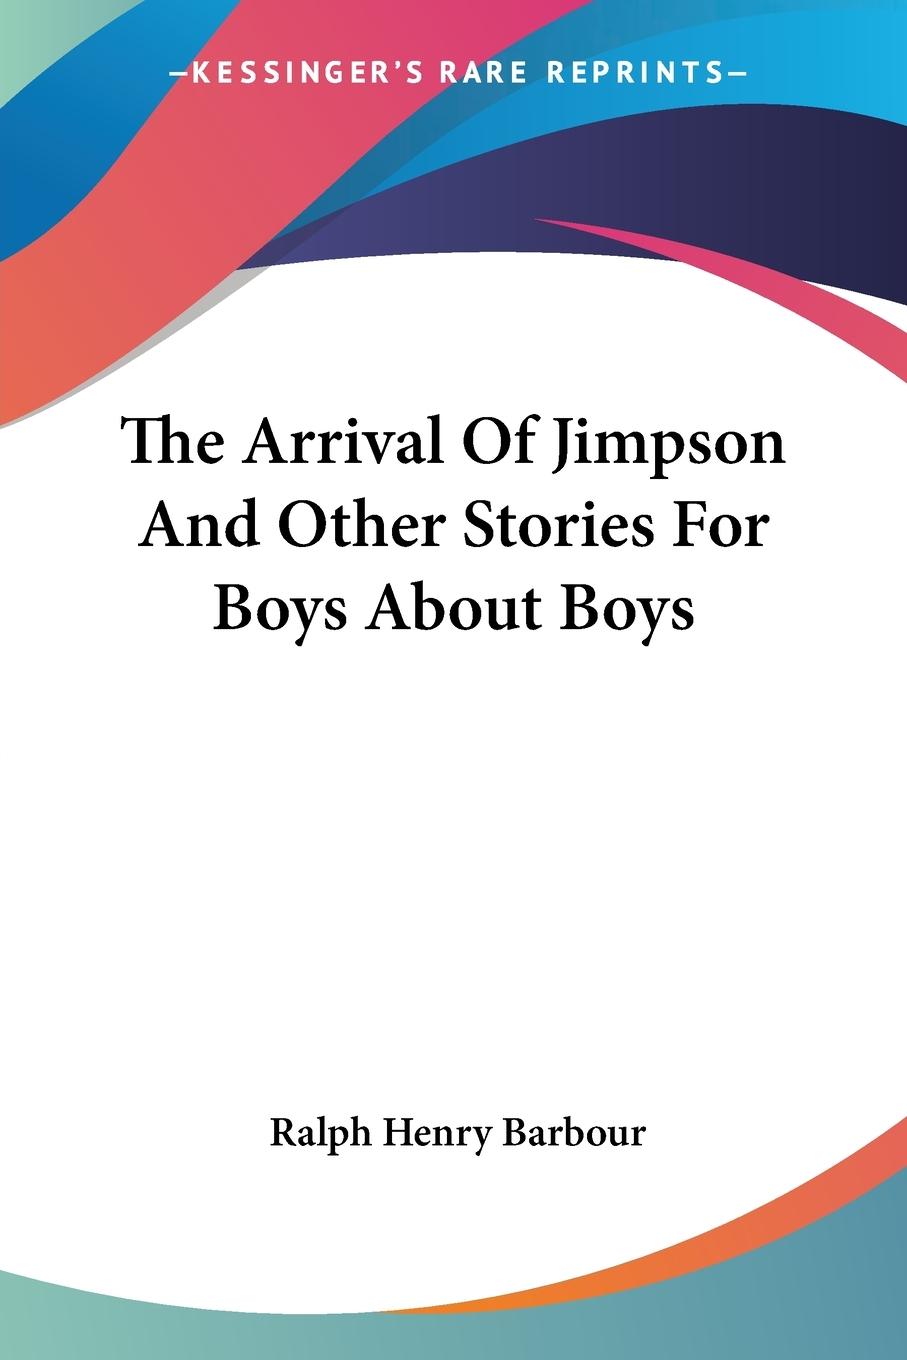 The Arrival Of Jimpson And Other Stories For Boys About Boys - Barbour, Ralph Henry